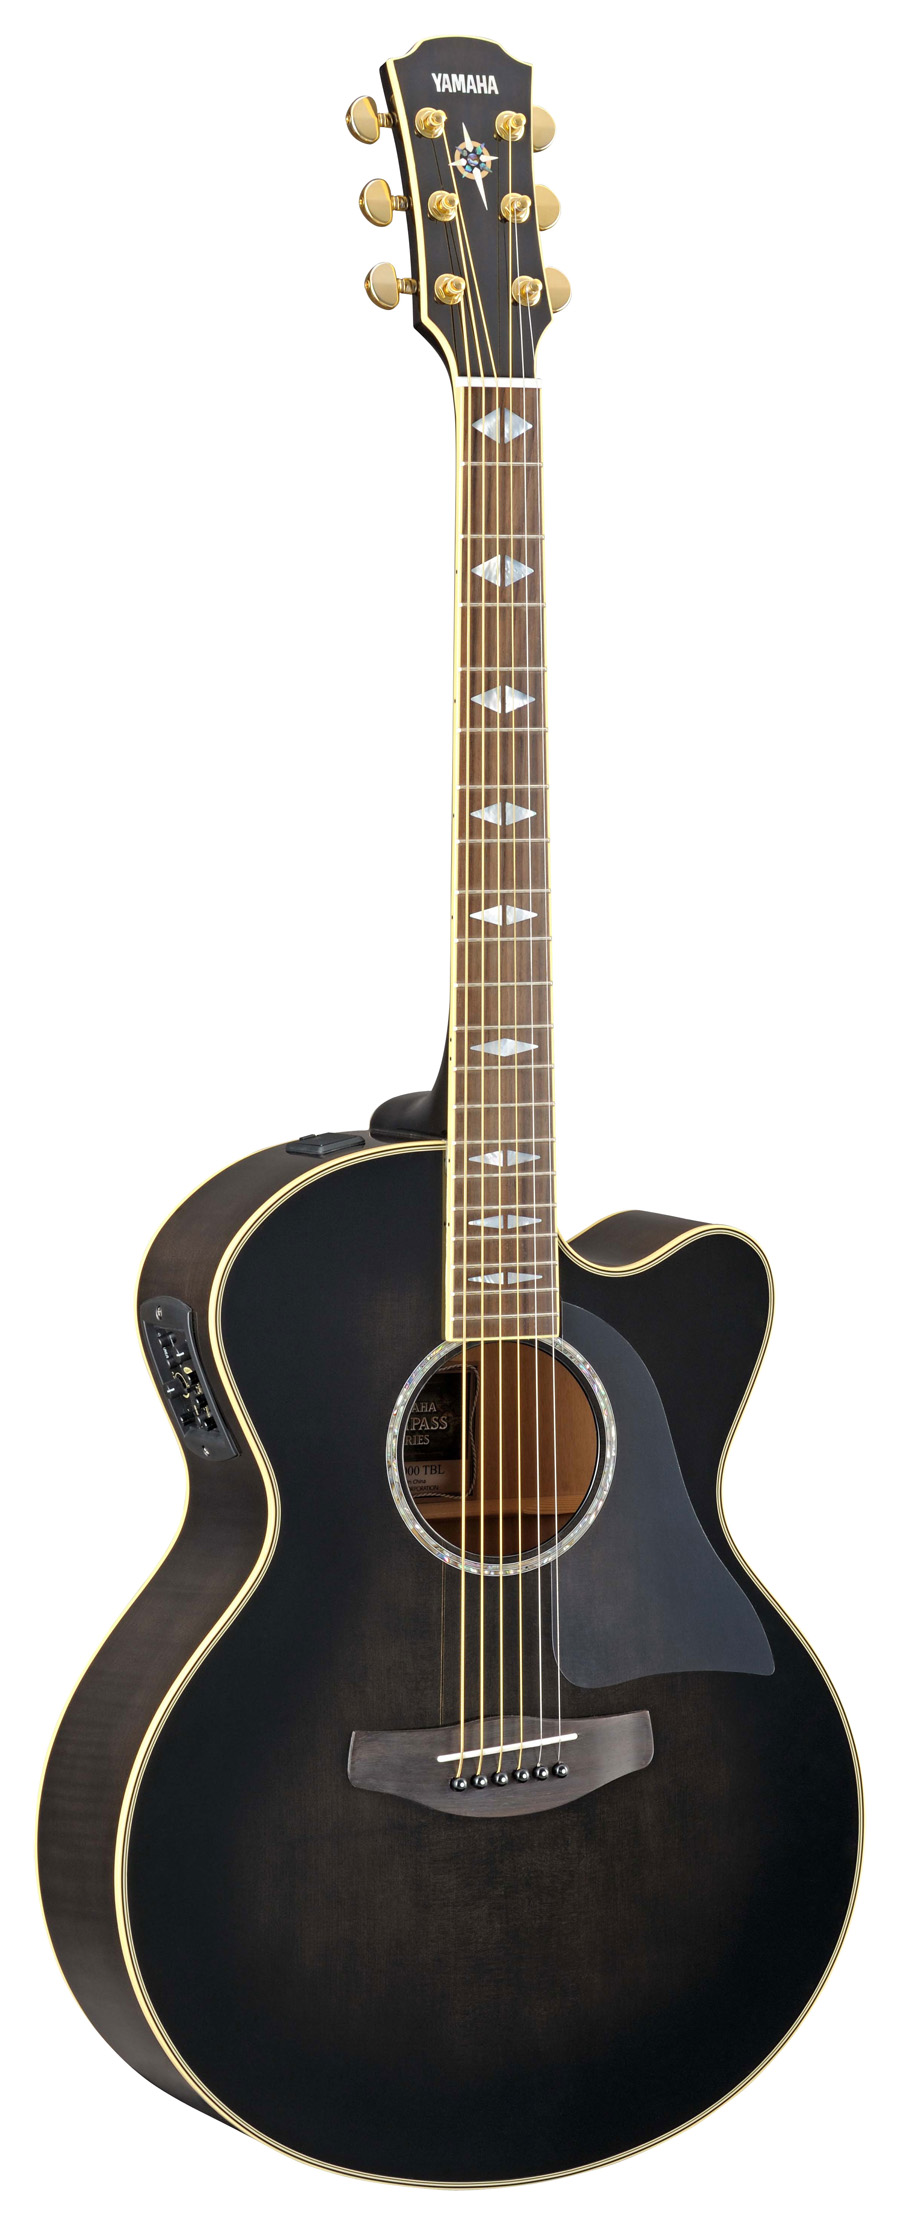 CPX1000 Electro-Acoustic Guitar In Translucent Black finish